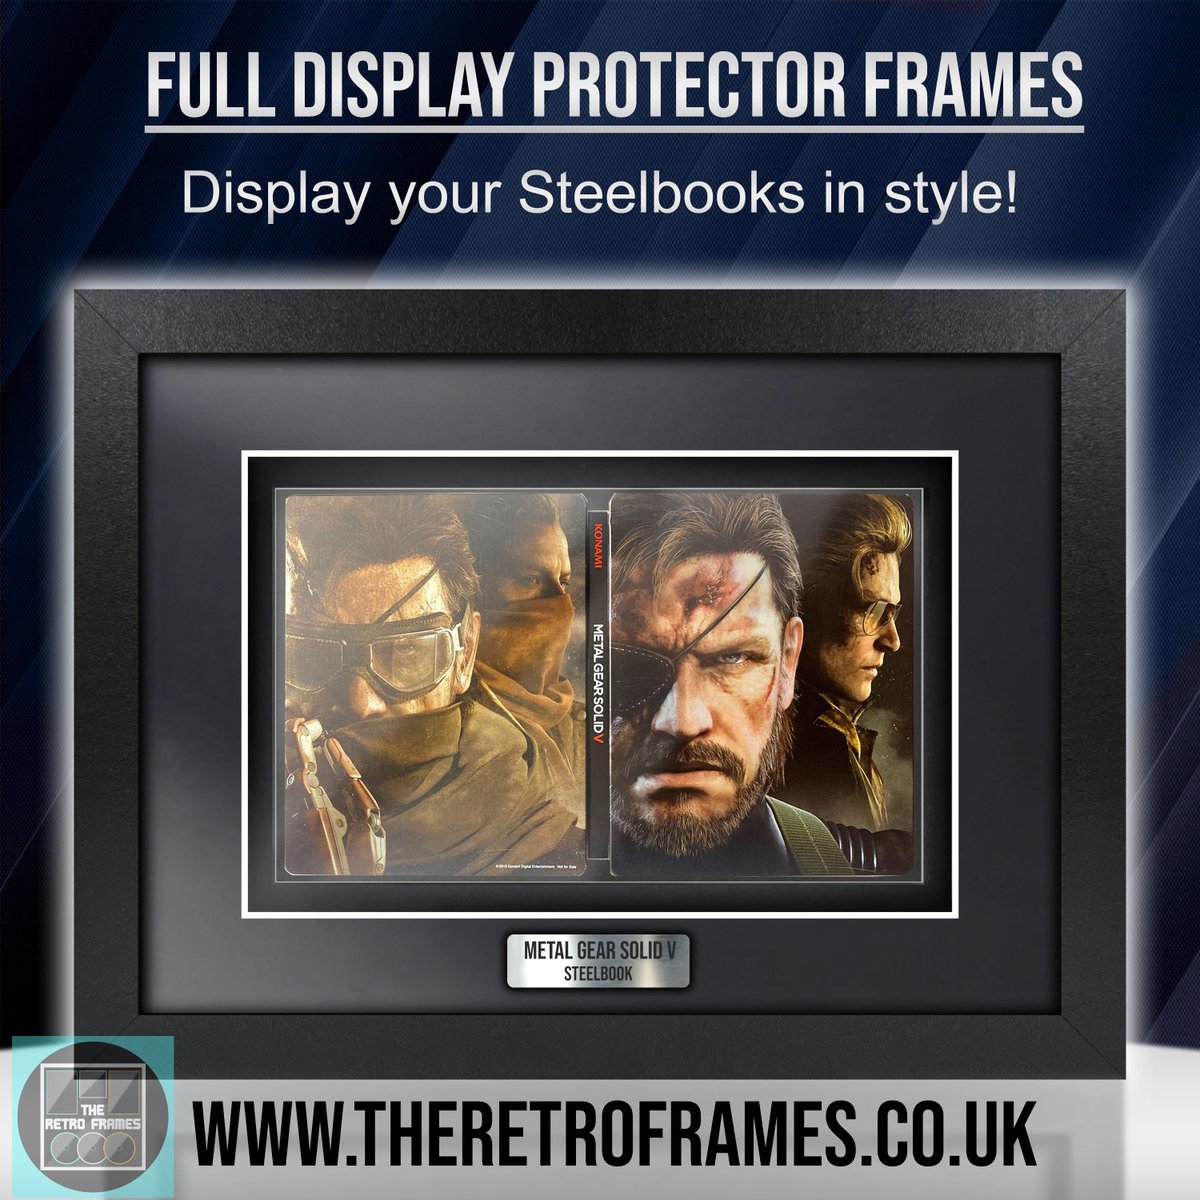 When #Steelbooks look this good, Why would you display them any other way? 
Display them the correct way, with The Retro Frames!

#Steelbookcollector #Steelbook #MetalGearSolid #4KSteelbook #SolidSnake #PlayStation #BluRay #Art #Steelbookcollection